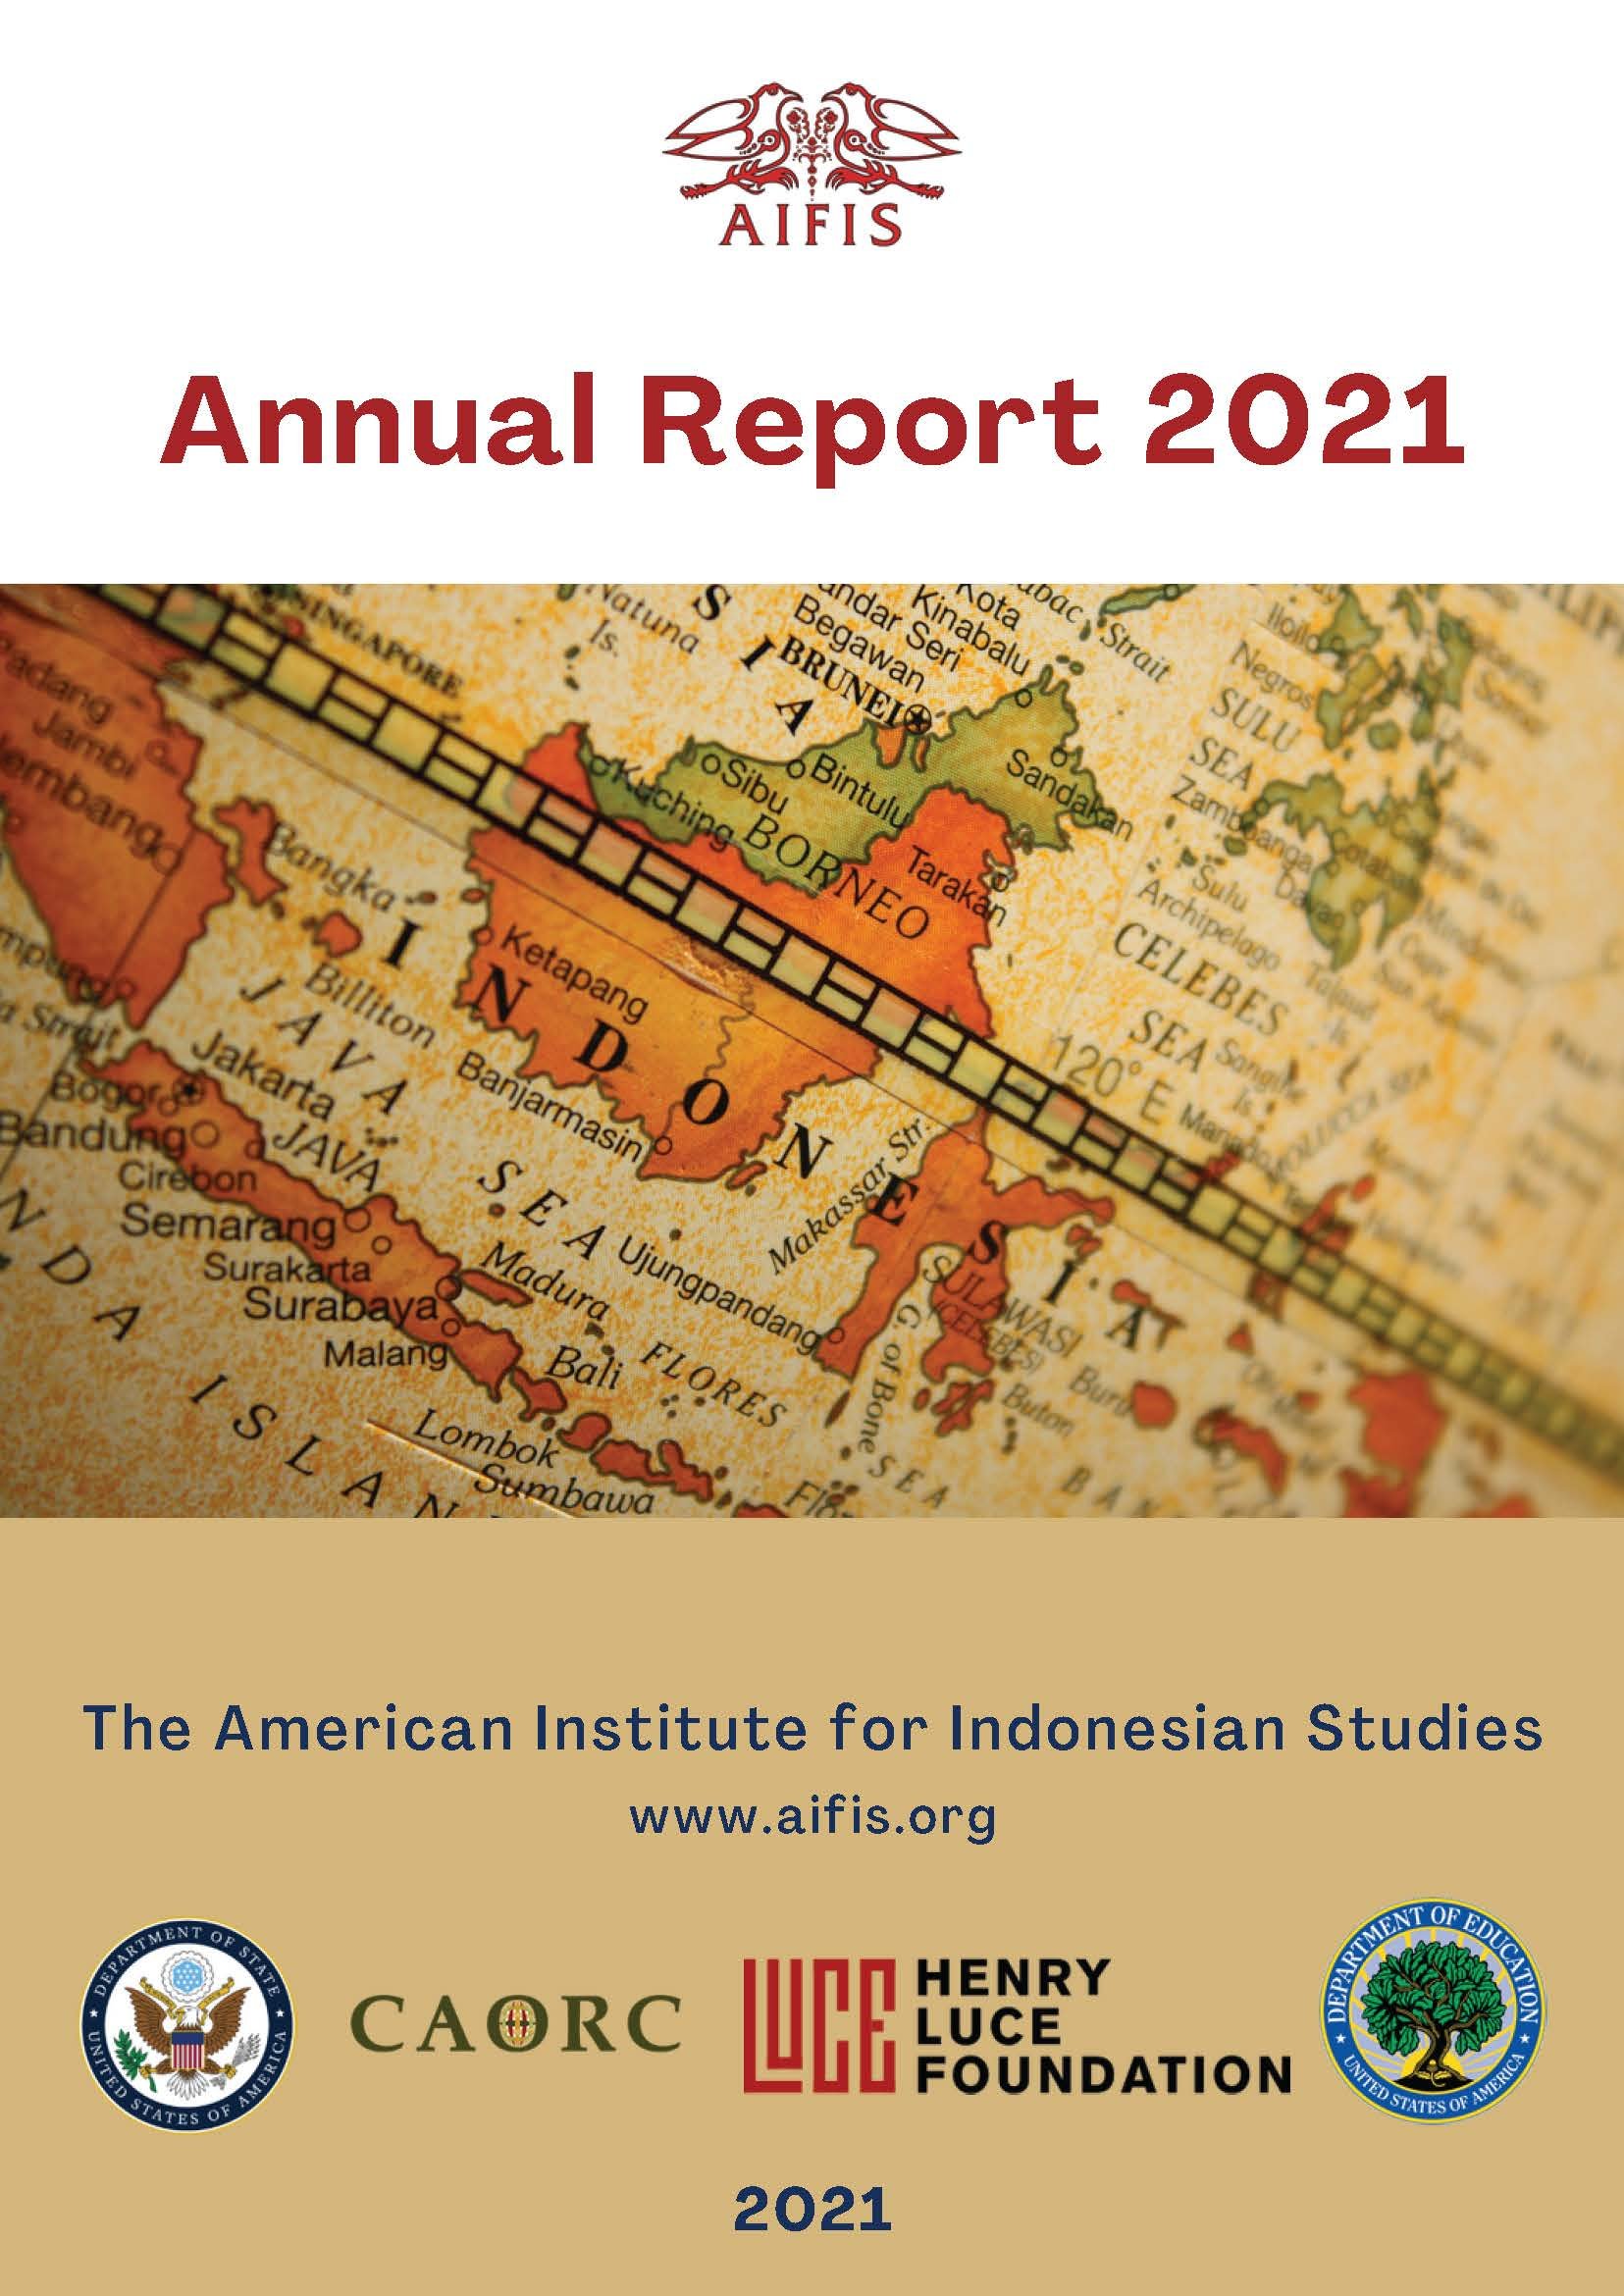 AIFIS Annual Report 2021_Corrected_Page_01.jpg